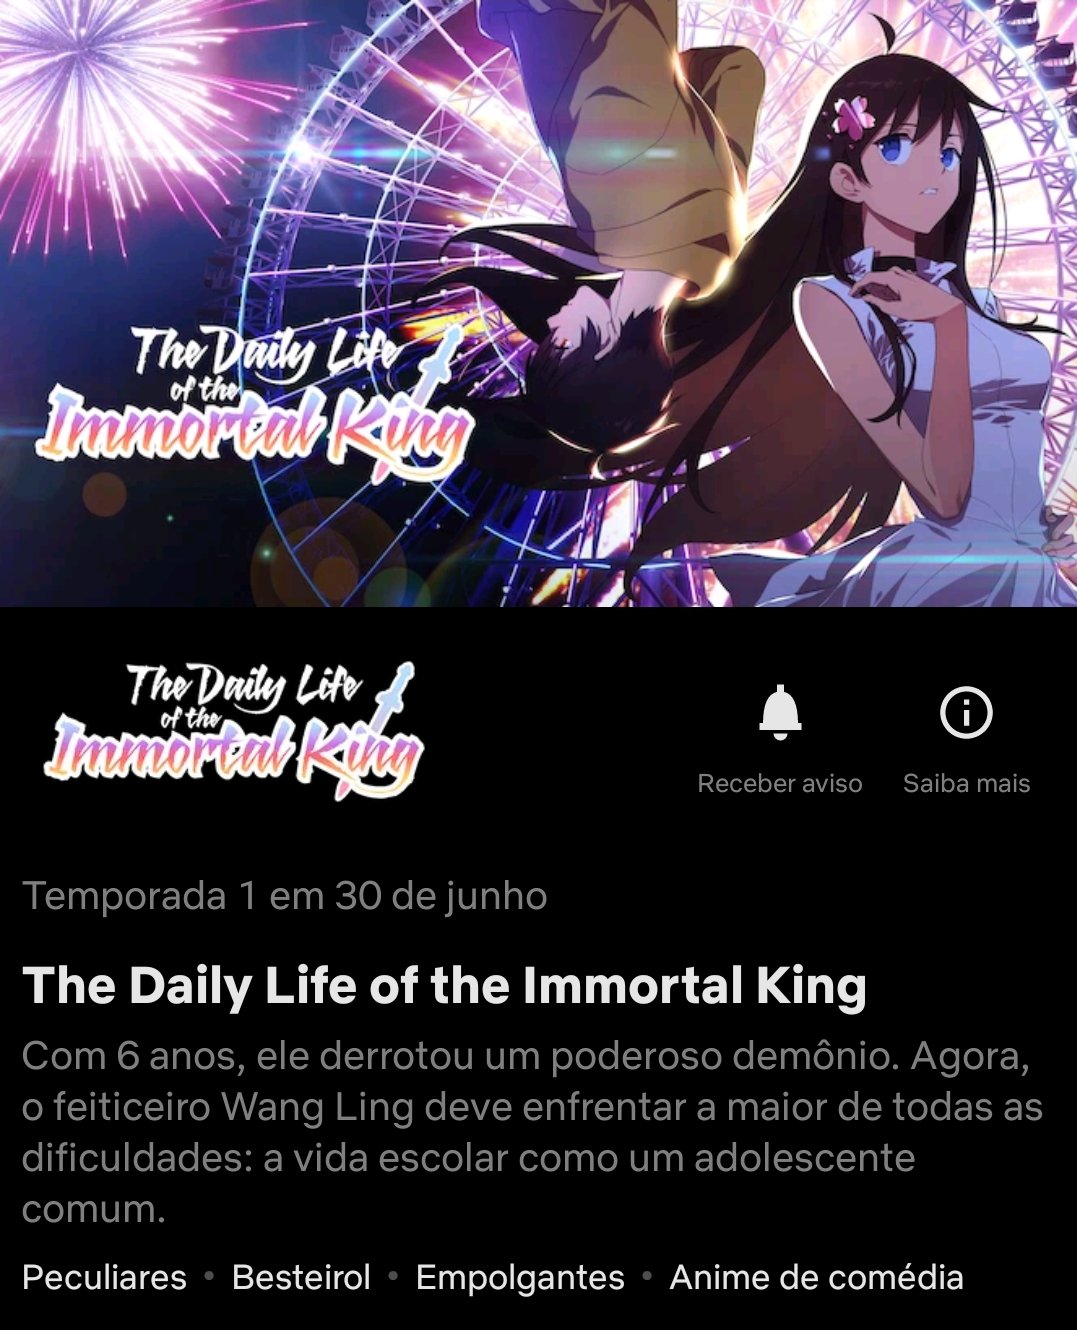 THE DAILY LIFE OF THE IMMORTAL KING 2ª TEMPORADA